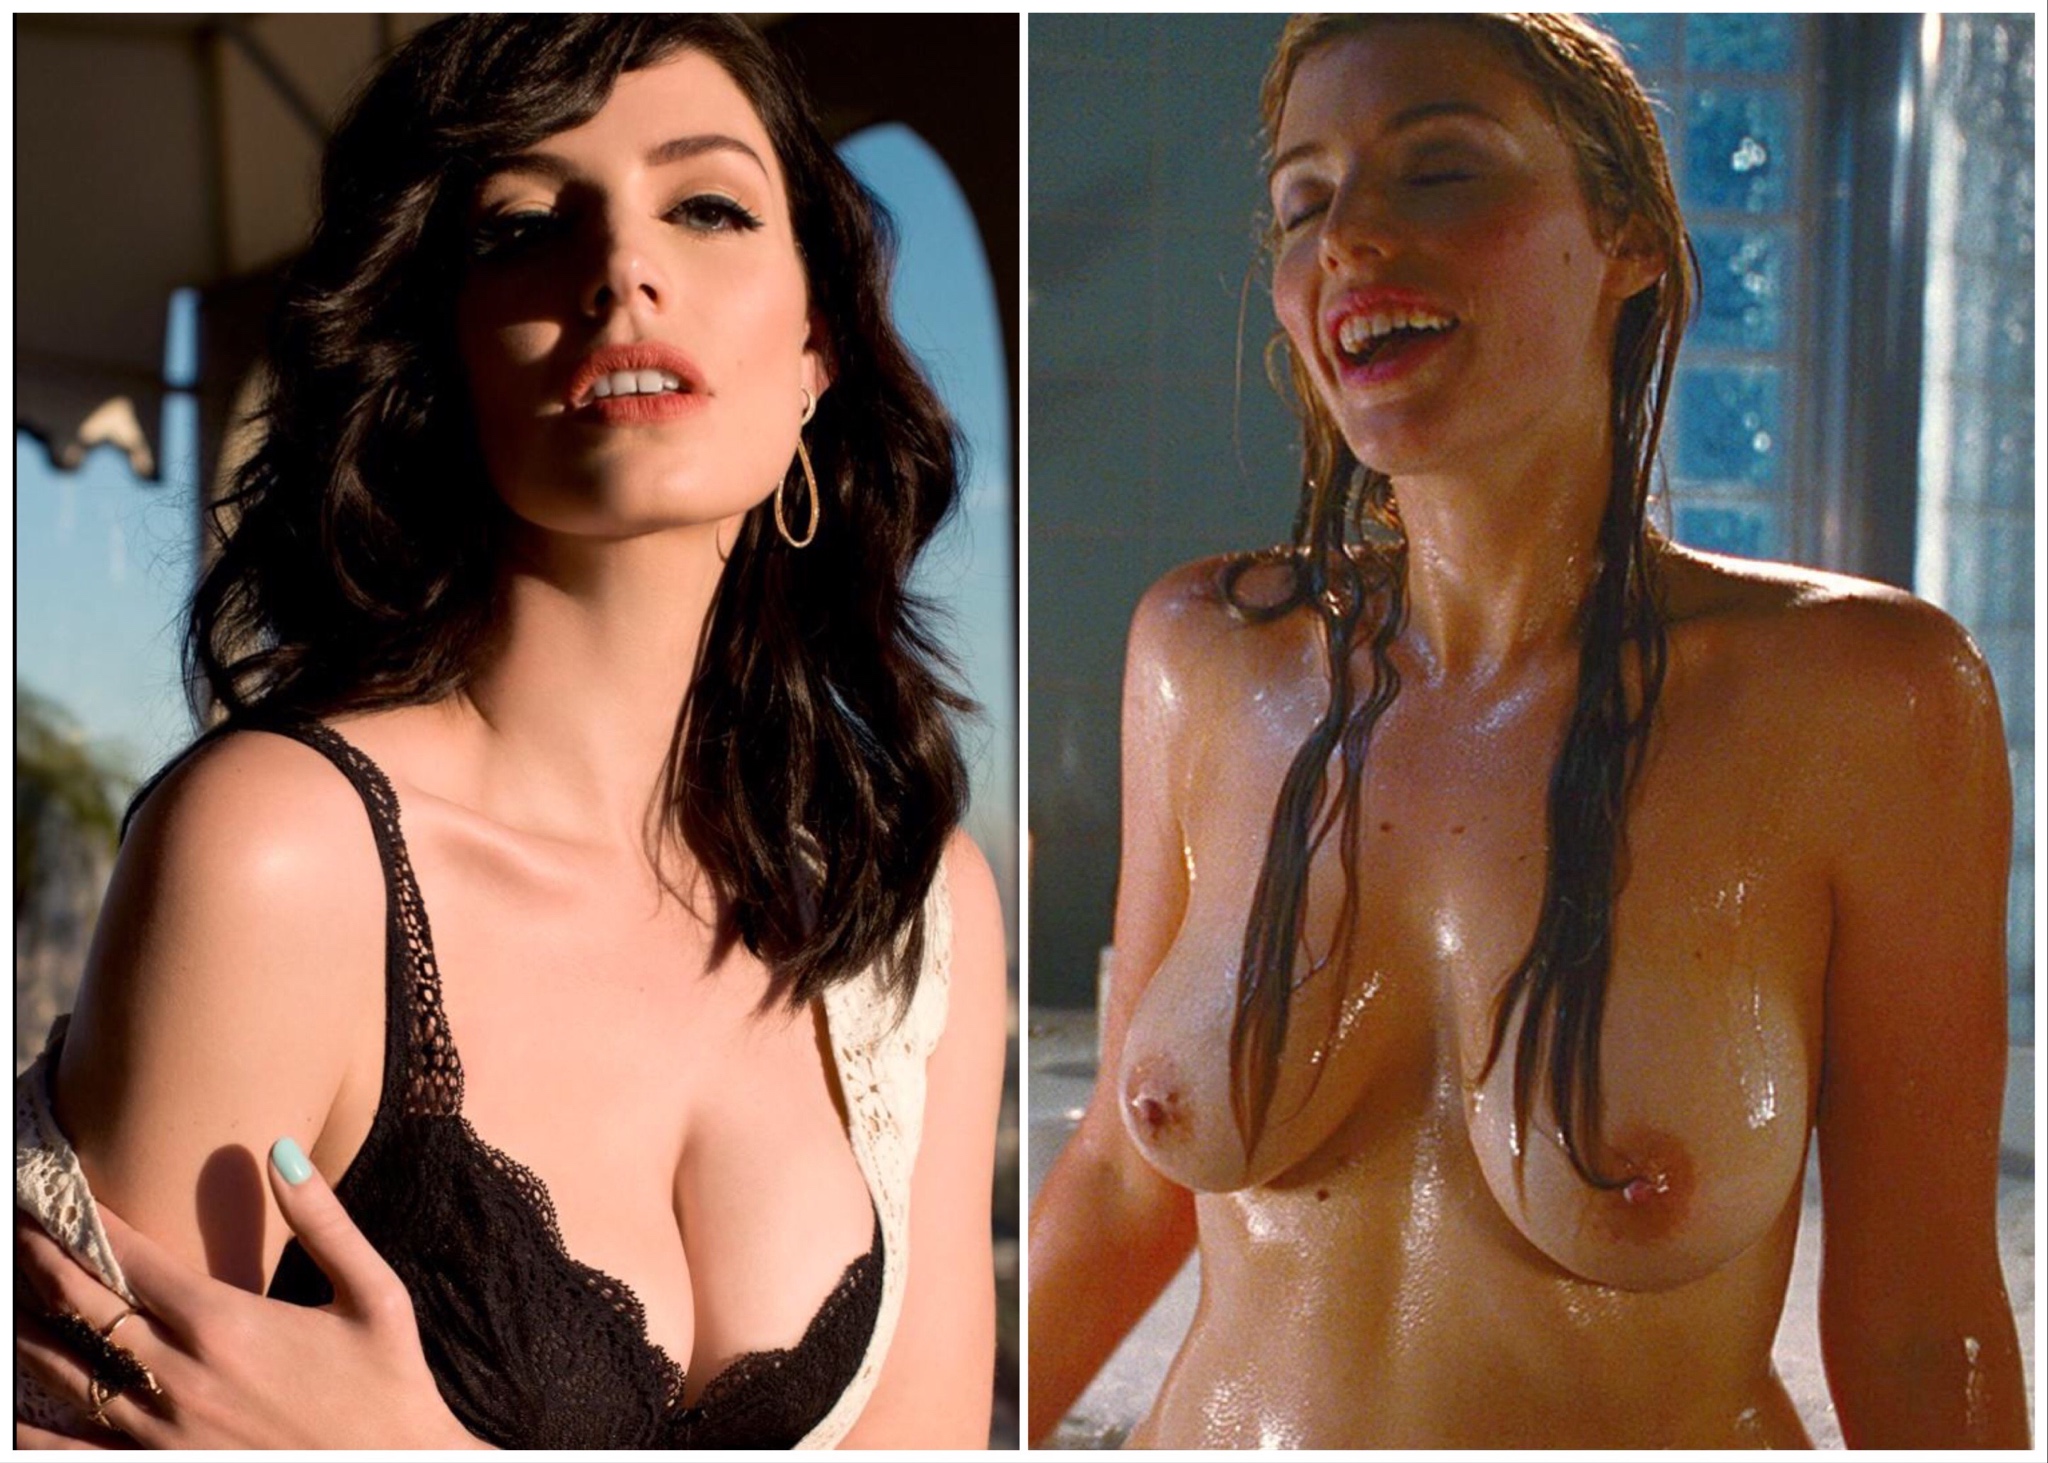 diana weatherby add jessica pare naked photo